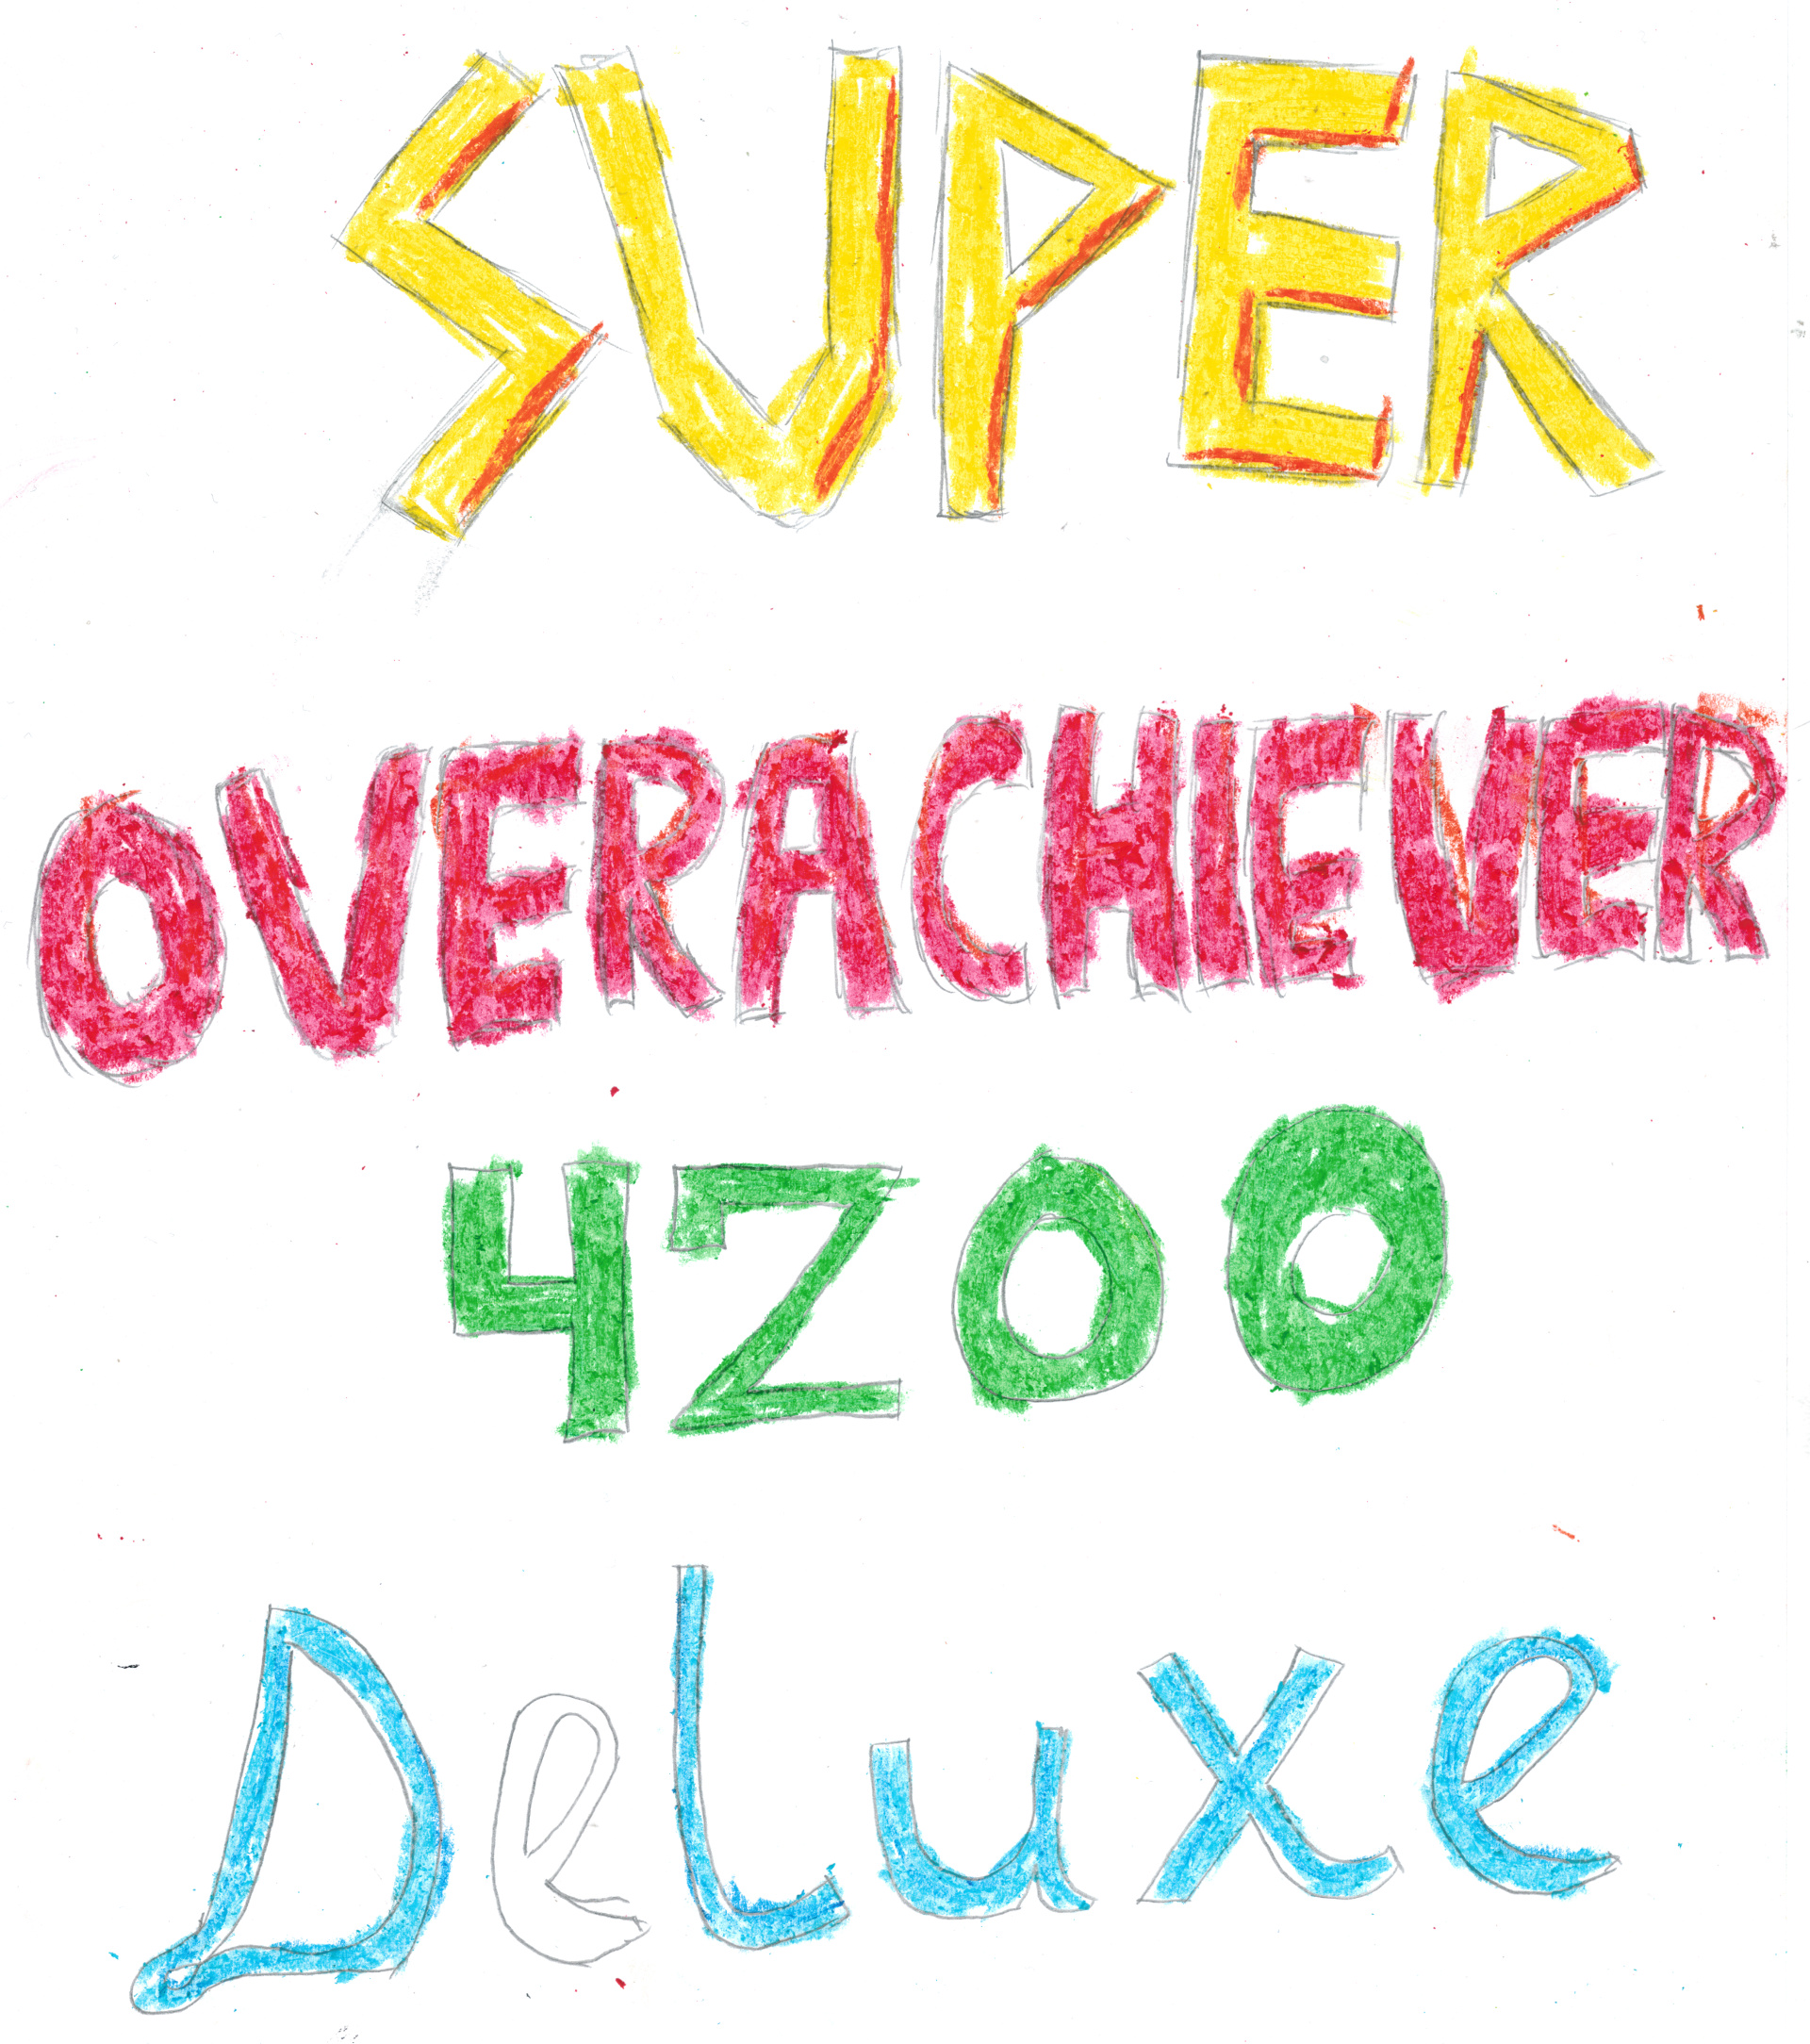 The original "Super Overachiever 42000 Deluxe" logo, drawn in pencil and coloured with crayons.